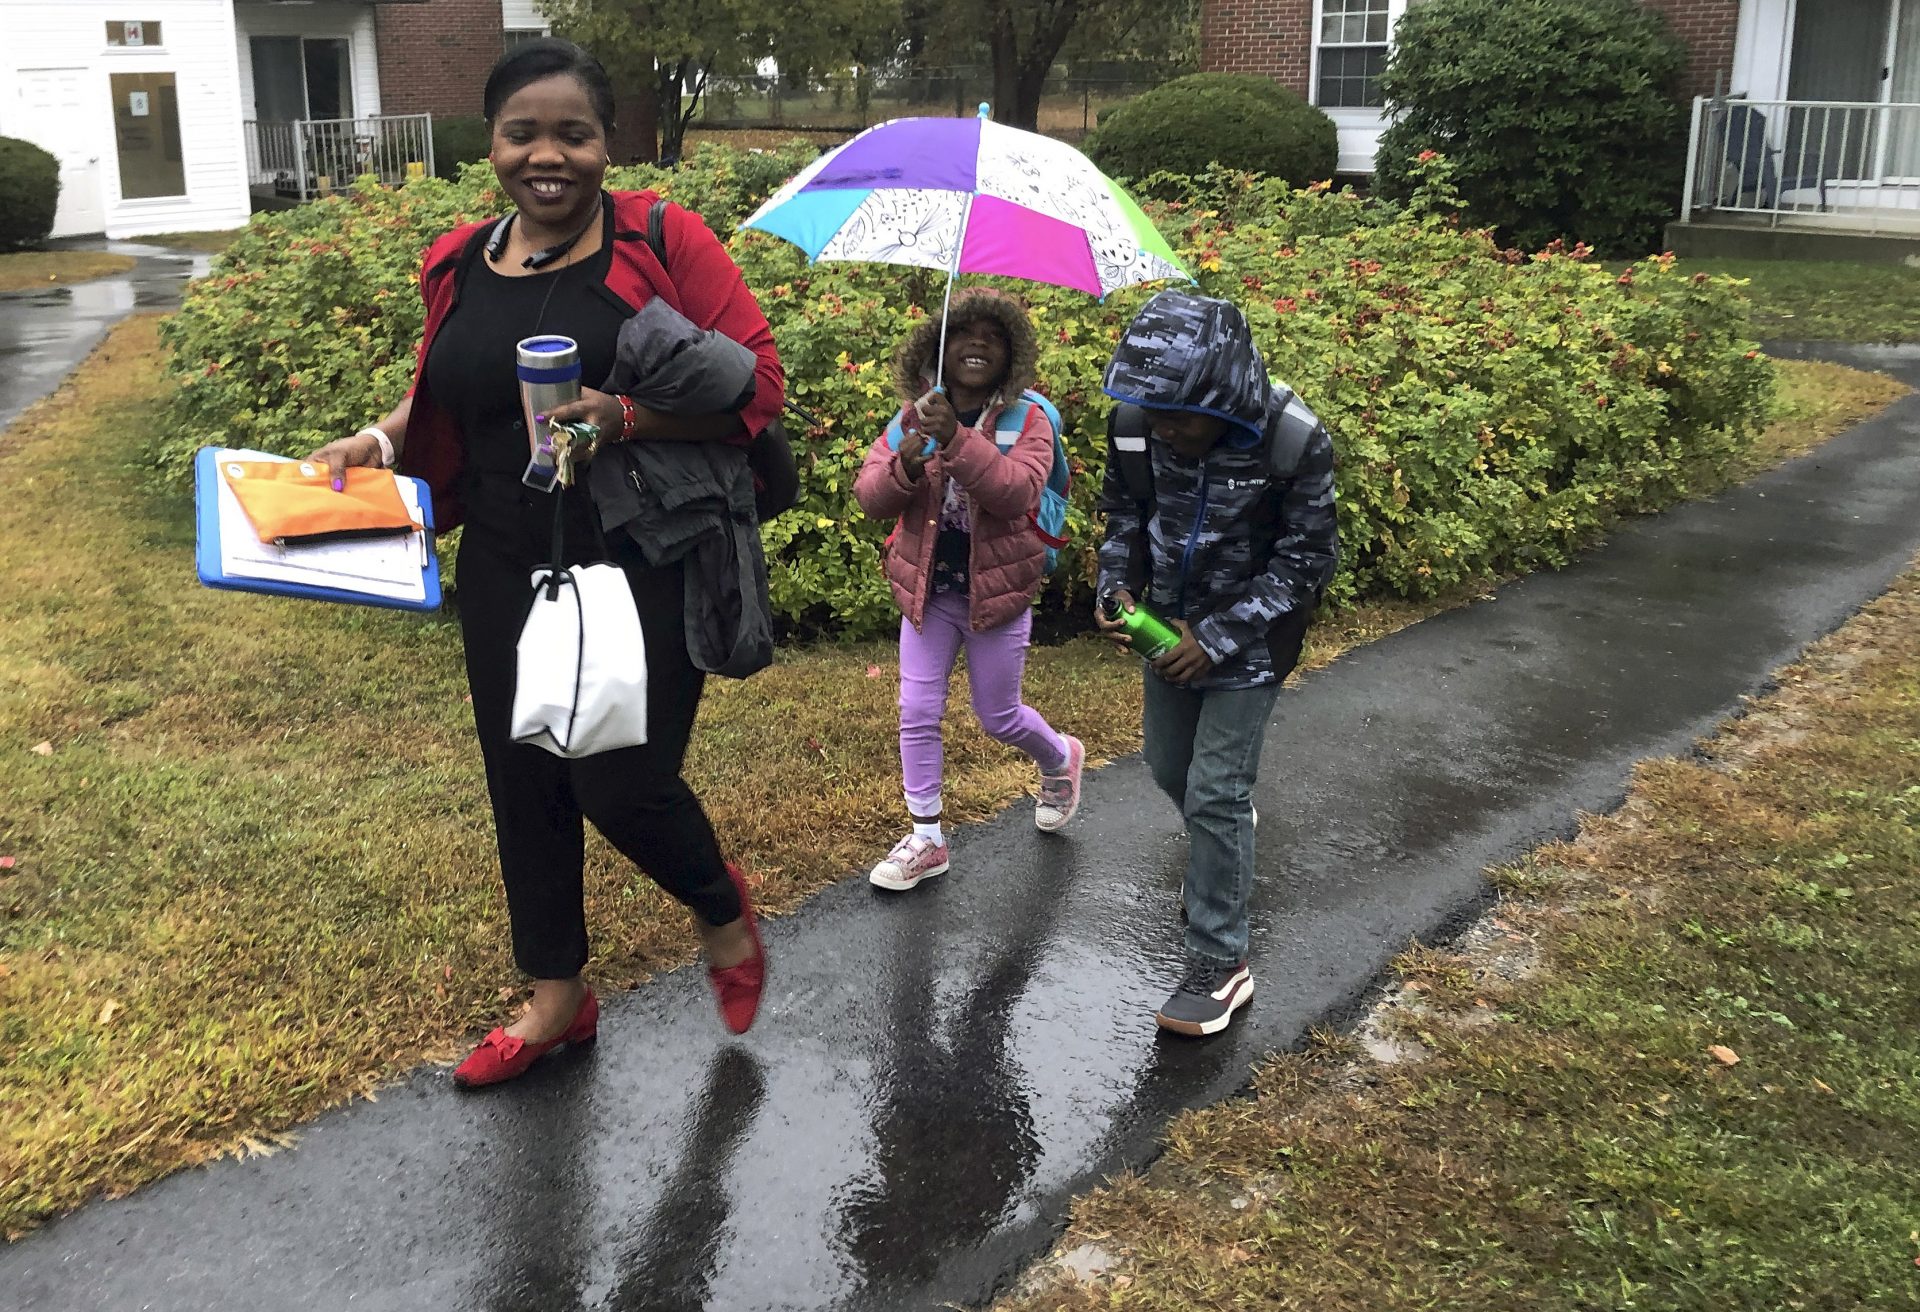 Betty Kabbashi, a medical interpreter, takes her children, Roda, 5, center, and Richie, 7, to school in the rain on Tuesday, Oct. 1, 2019, in South Portland, Maine. Kabbashi, who was a dentist in South Sudan, disagrees with President Trump's plan to further cut refugee quotas.